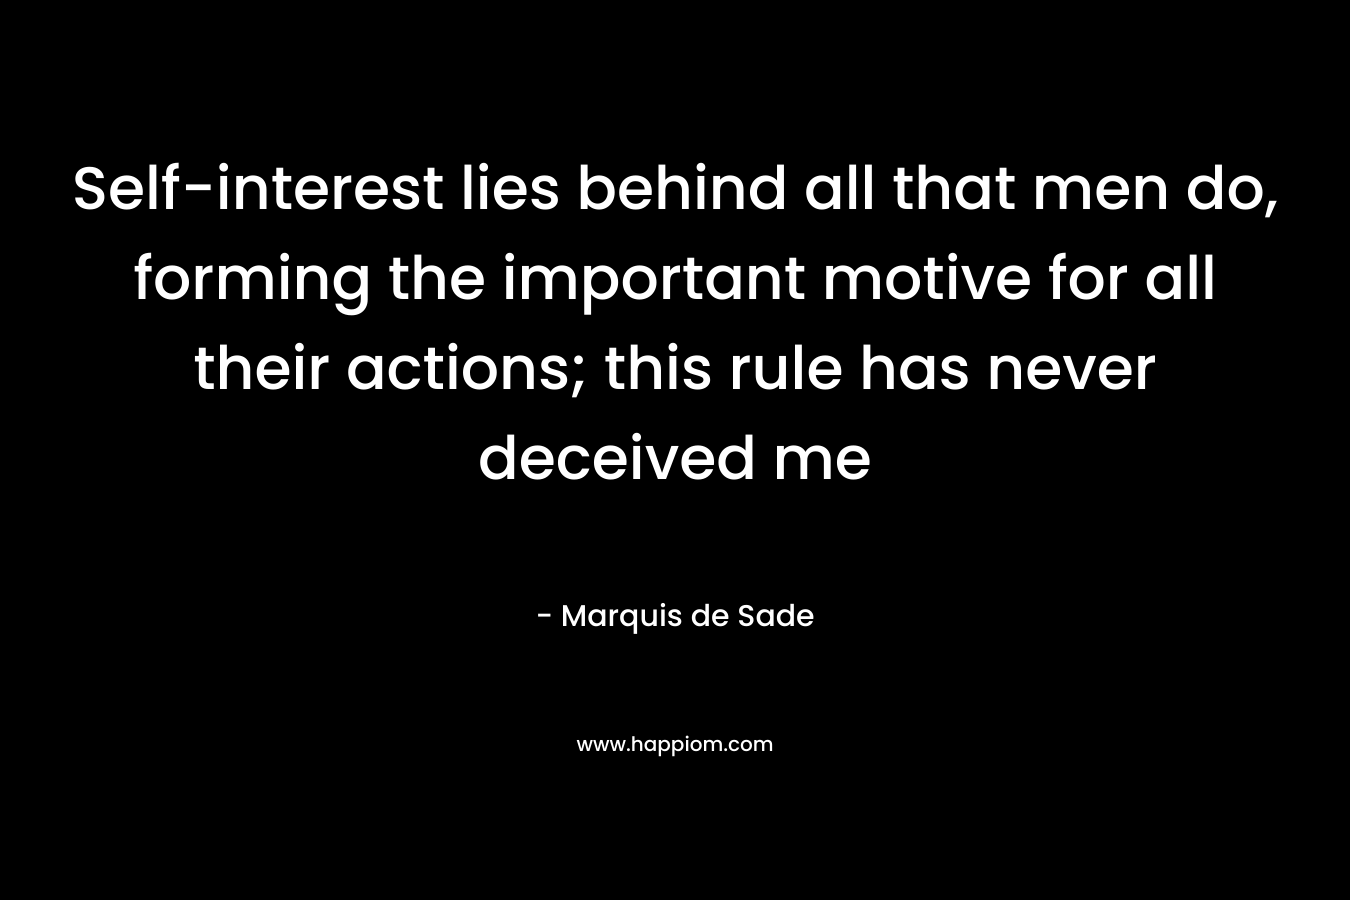 Self-interest lies behind all that men do, forming the important motive for all their actions; this rule has never deceived me – Marquis de Sade